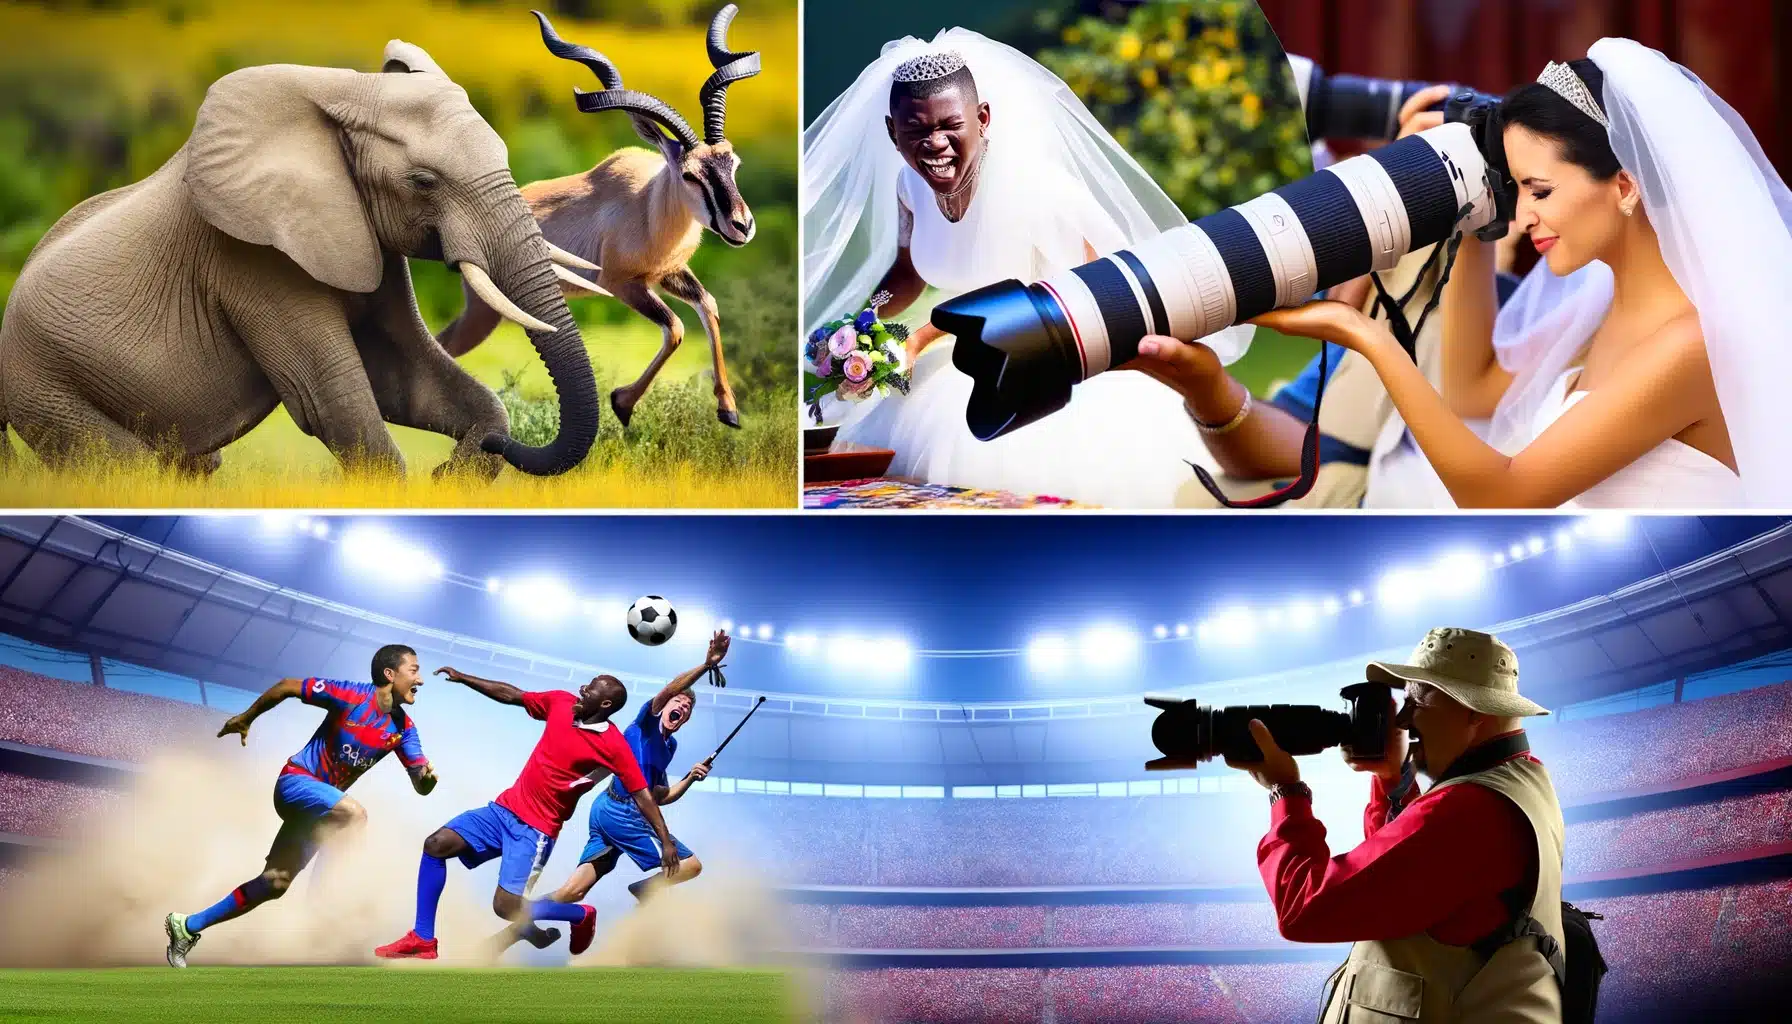 Dynamic collage of photographers in action across genres: wildlife, weddings, sports, and photojournalism.